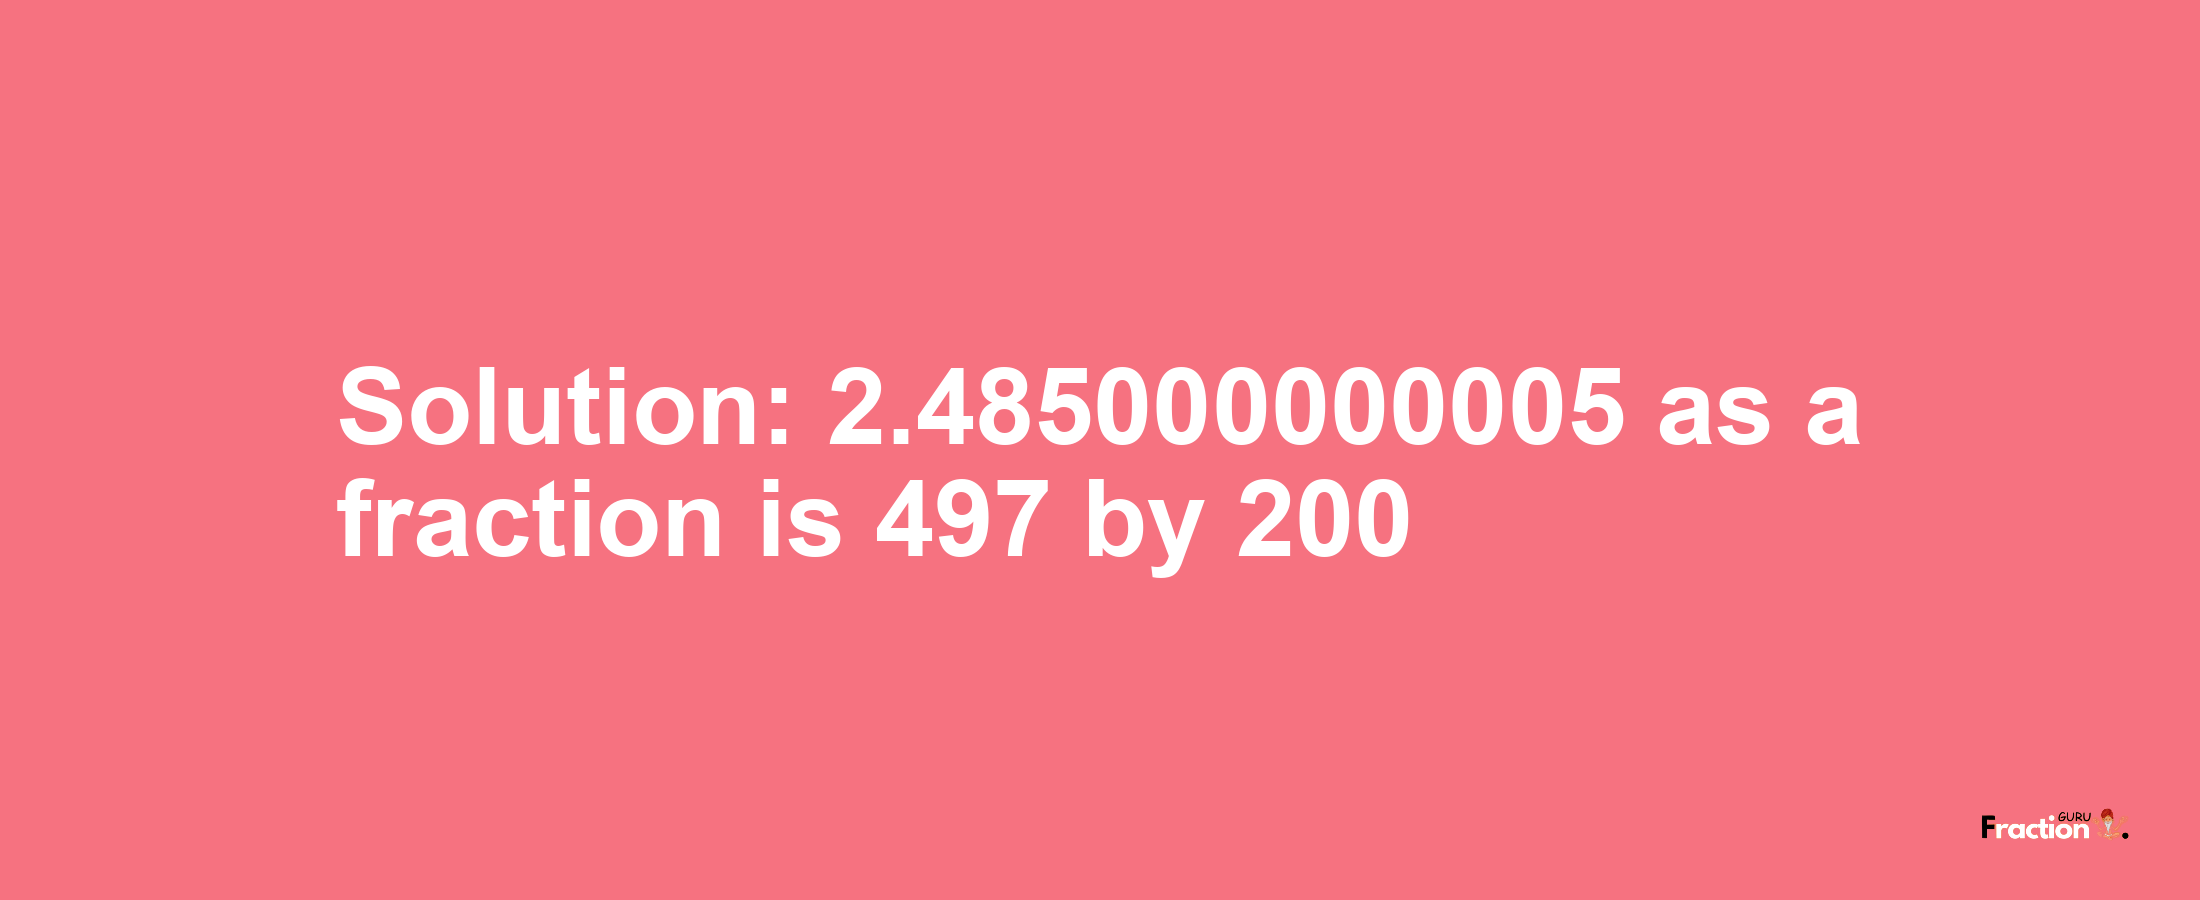 Solution:2.485000000005 as a fraction is 497/200